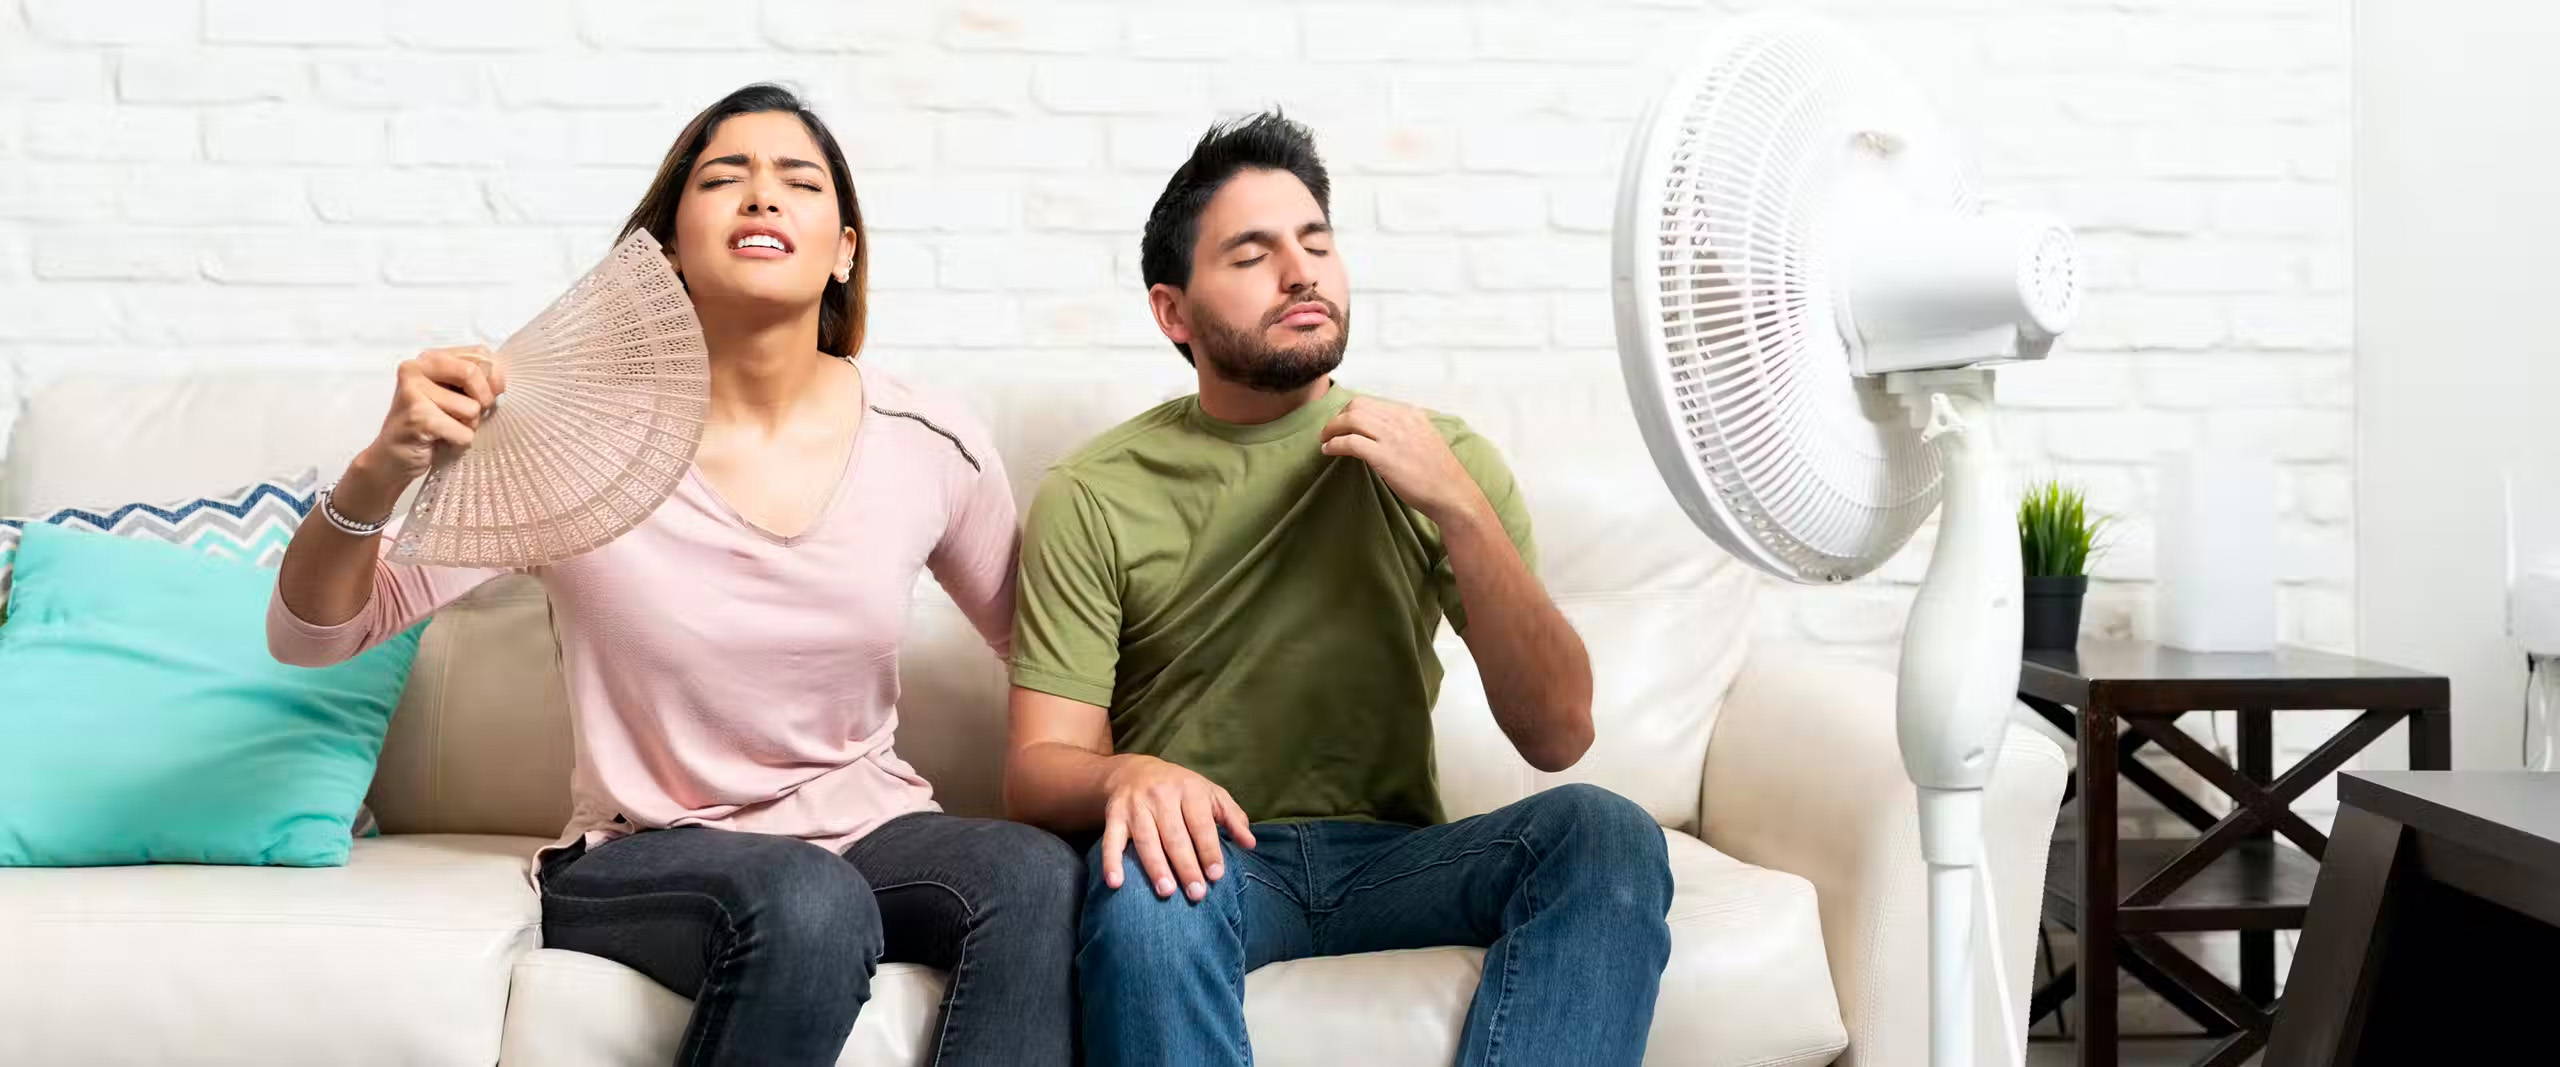 Woman and man fanning themselves in a hot room